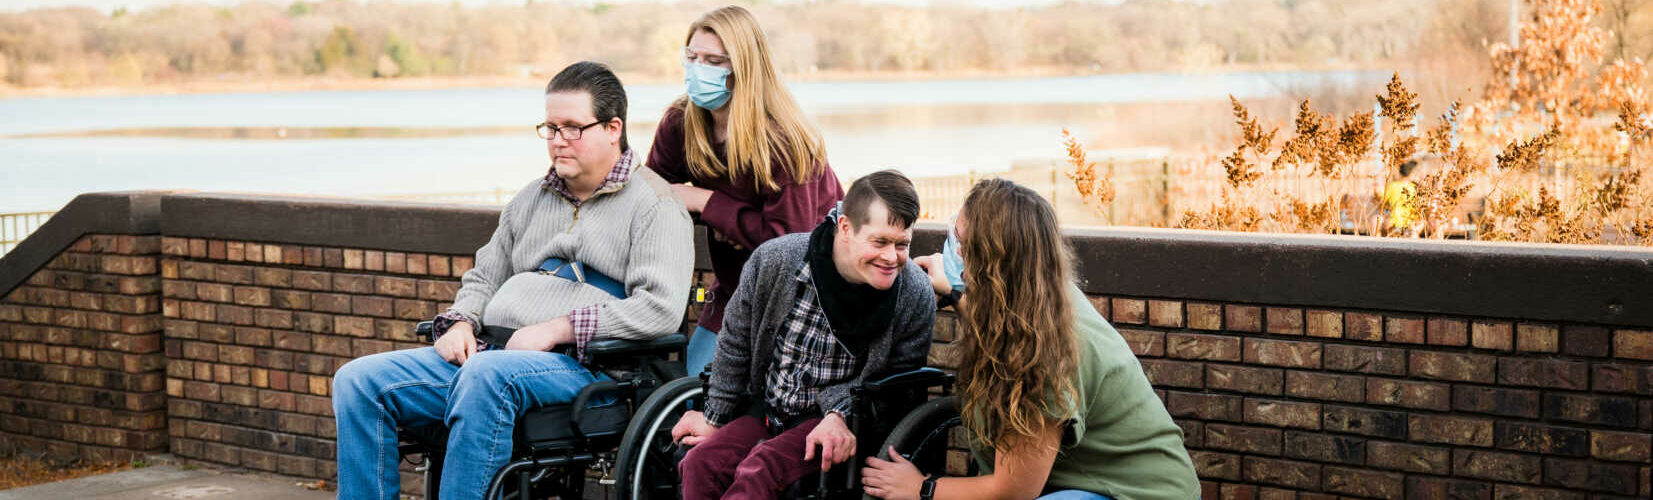 ACR Homes Direct Care Professionals and residents with disabilities at a local Minneapolis/St. Paul Metro Area of Minnesota park